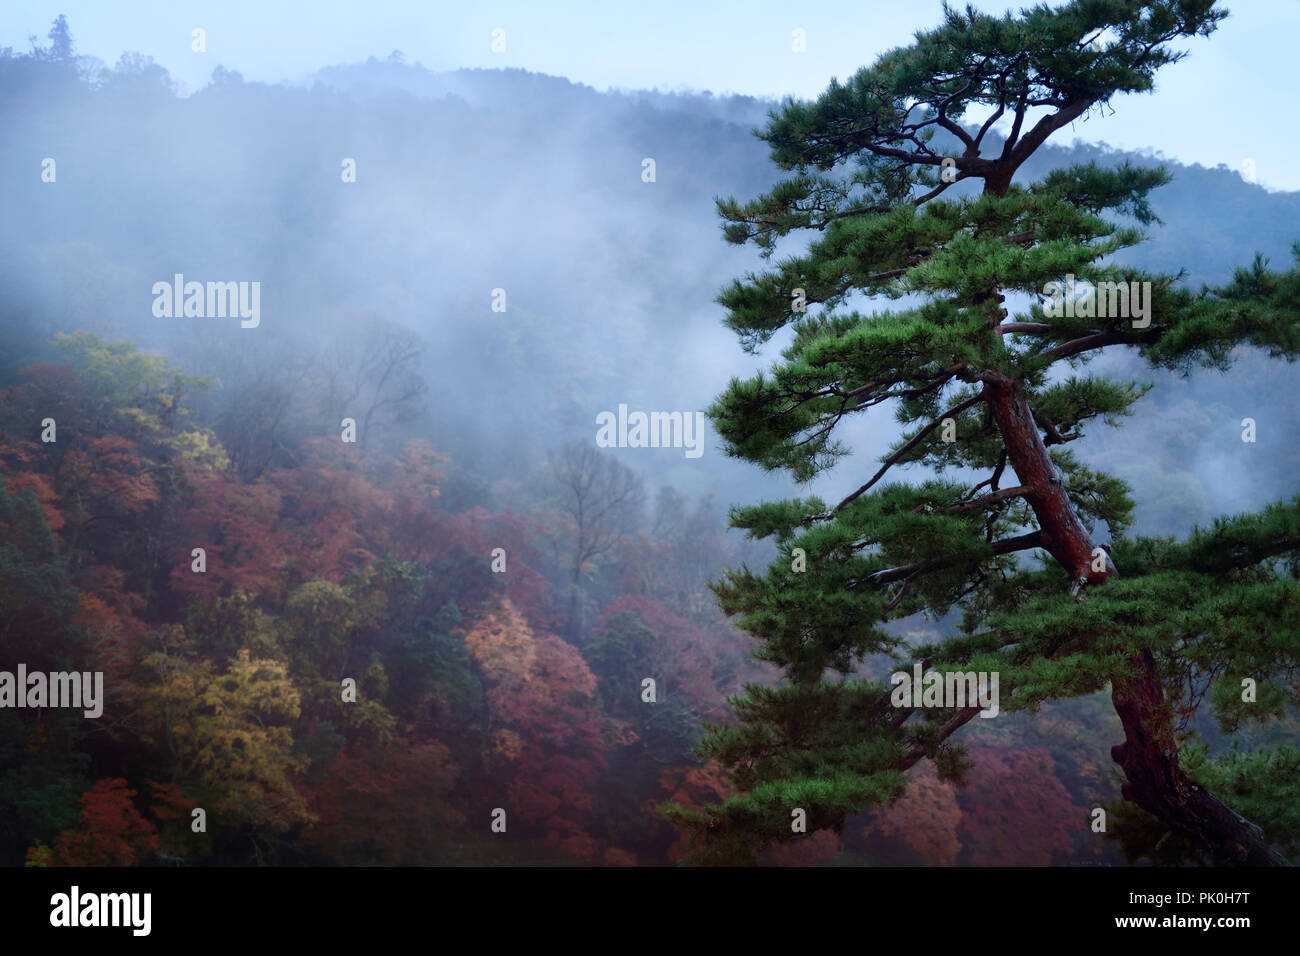 License available at MaximImages.com - Beautiful old Japanese red pine tree, Pinus densiflora, in a foggy autumn morning scenery with Arashiyama mount Stock Photo